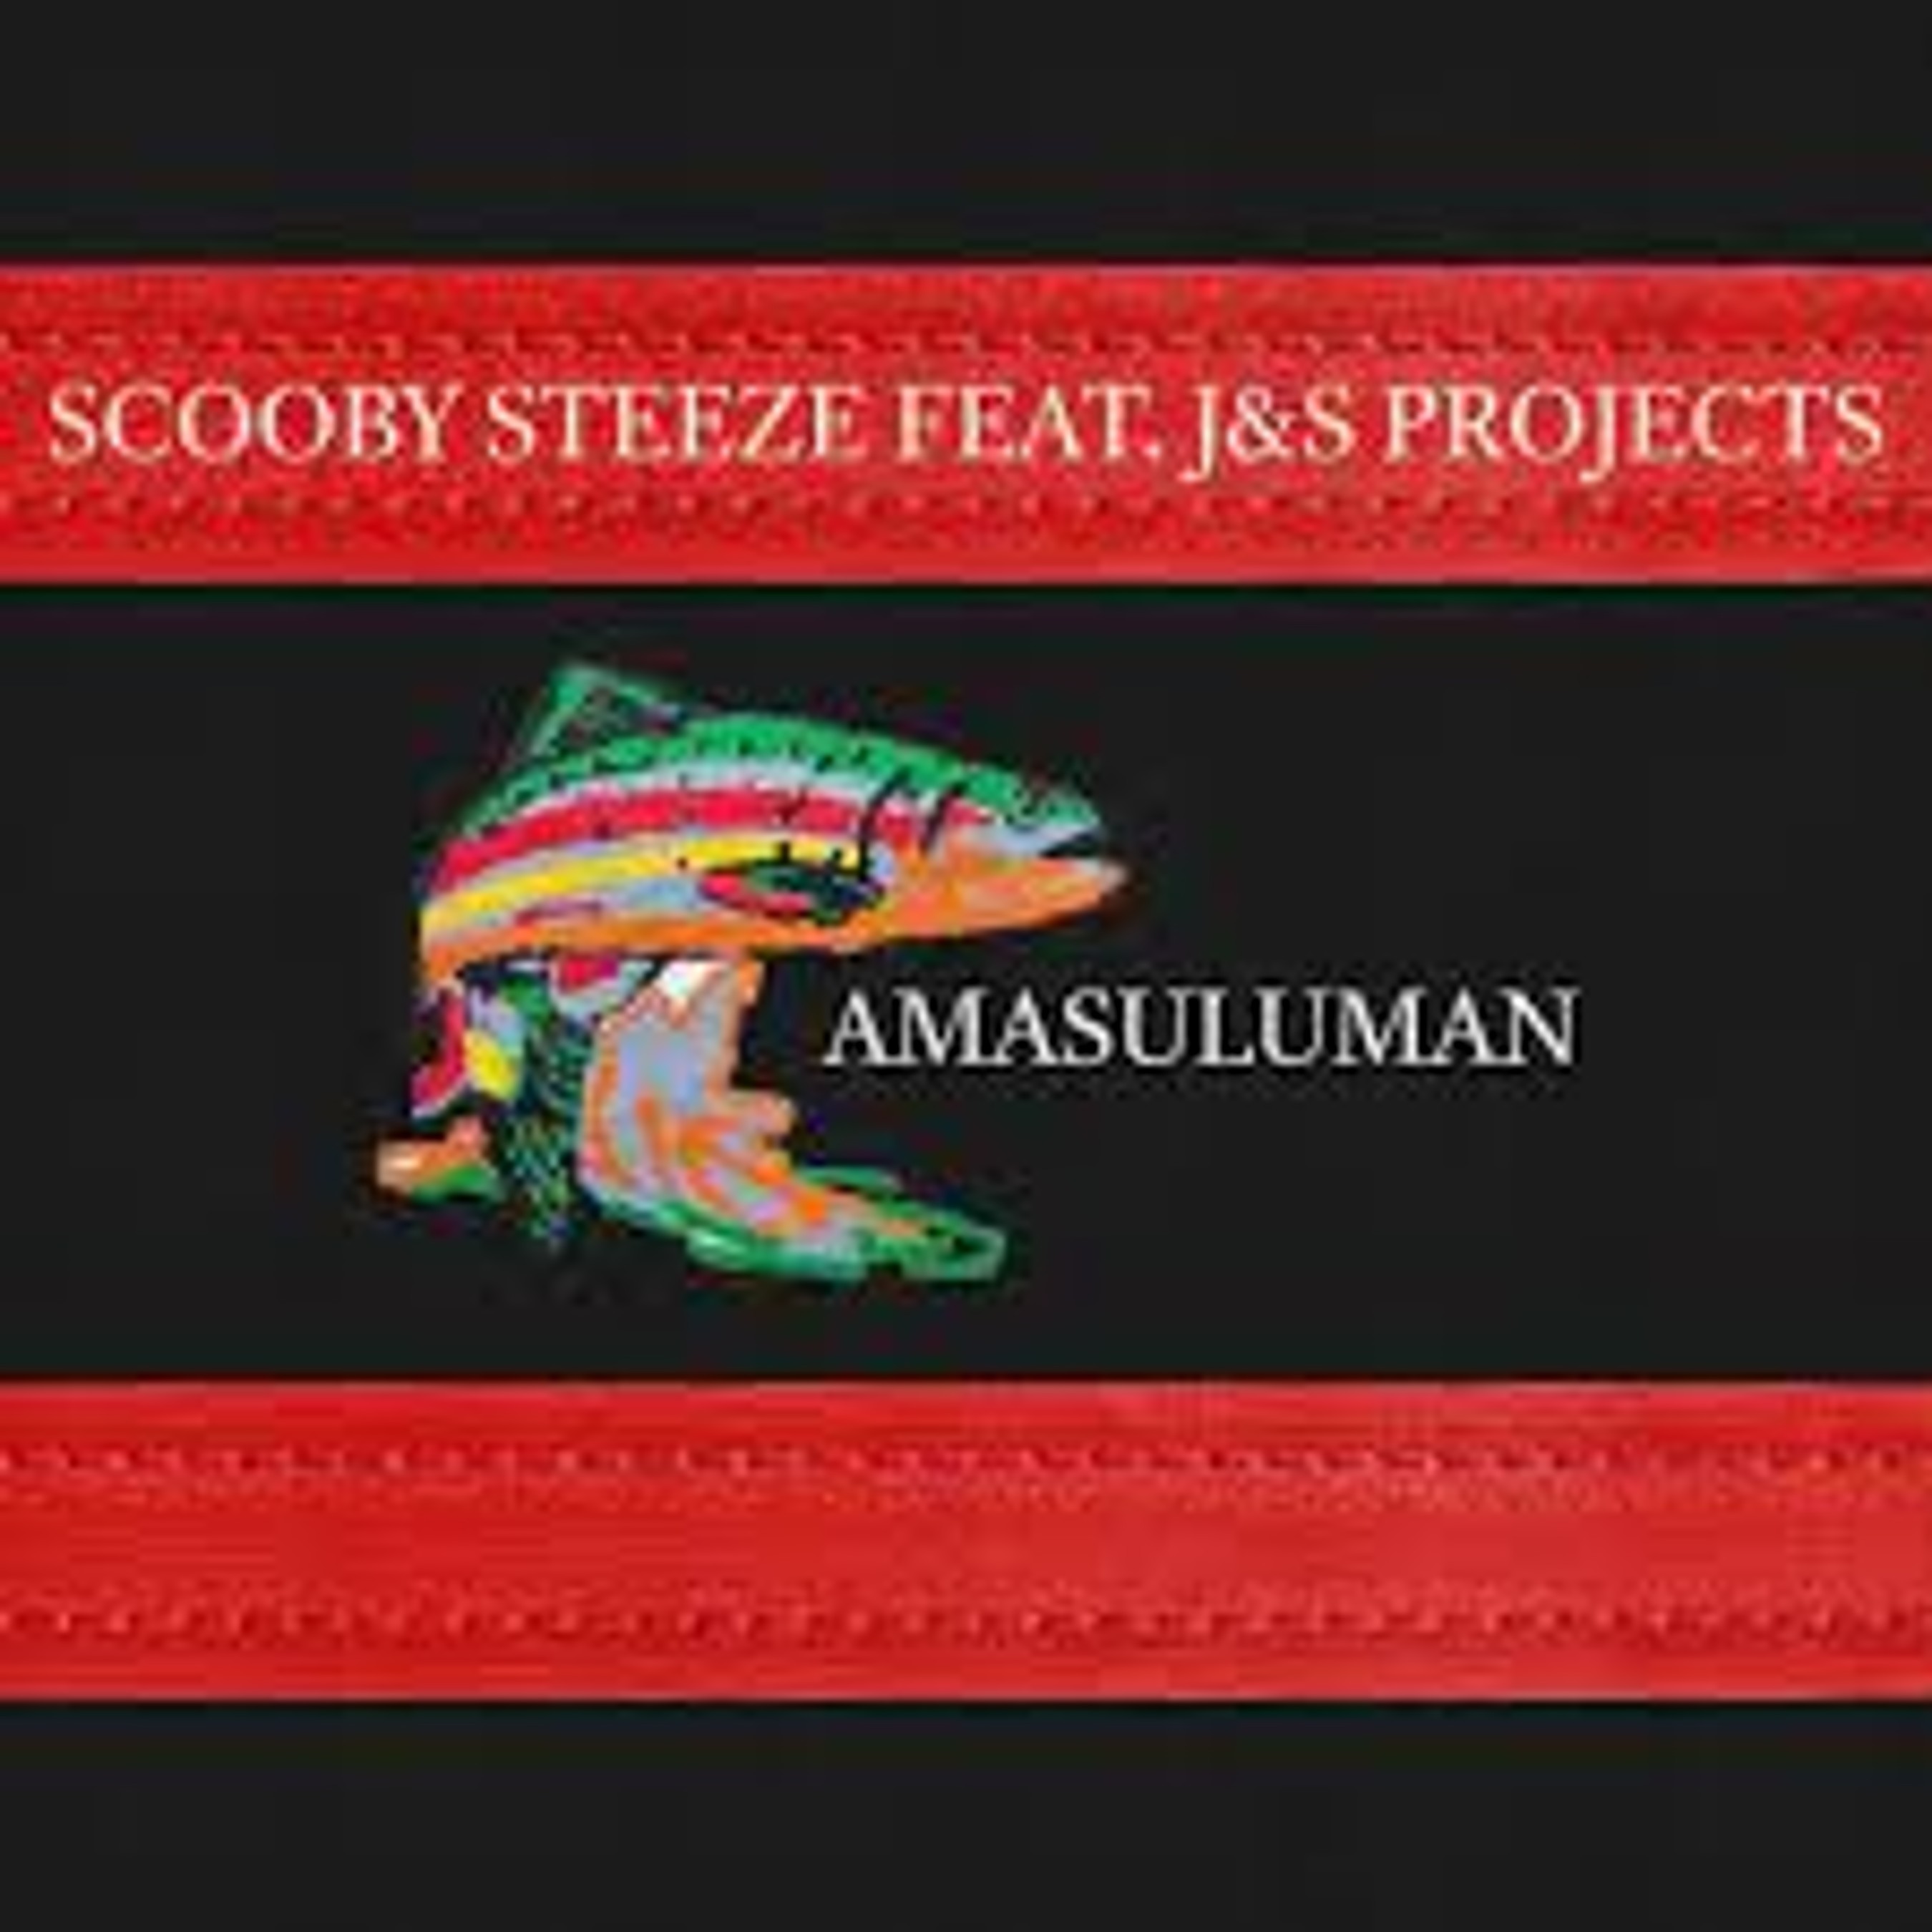 Scooby Steeze & J&S Projects – Amasuluman Mp3 Download Fakaza: